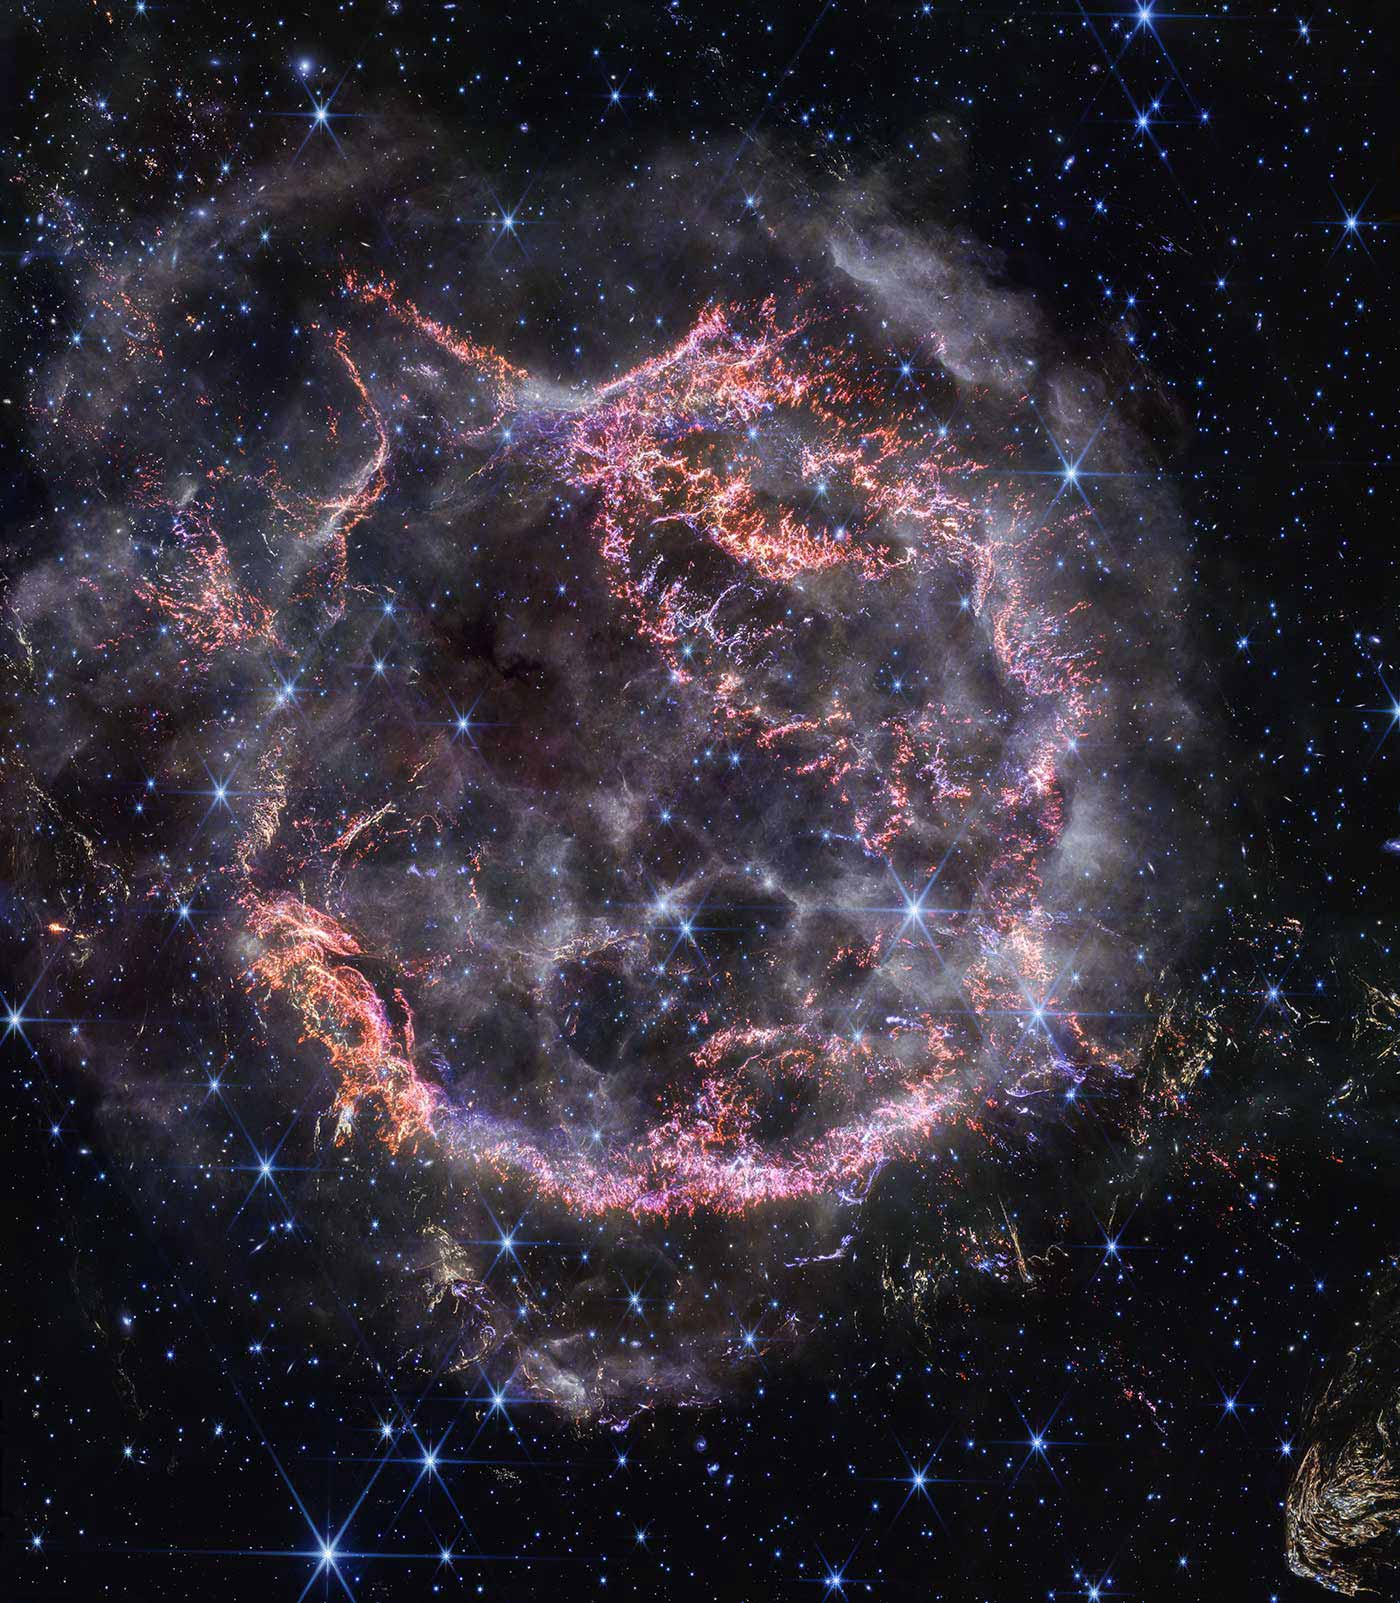 An image showing expanding shells of debris from Cas A, an exploded star